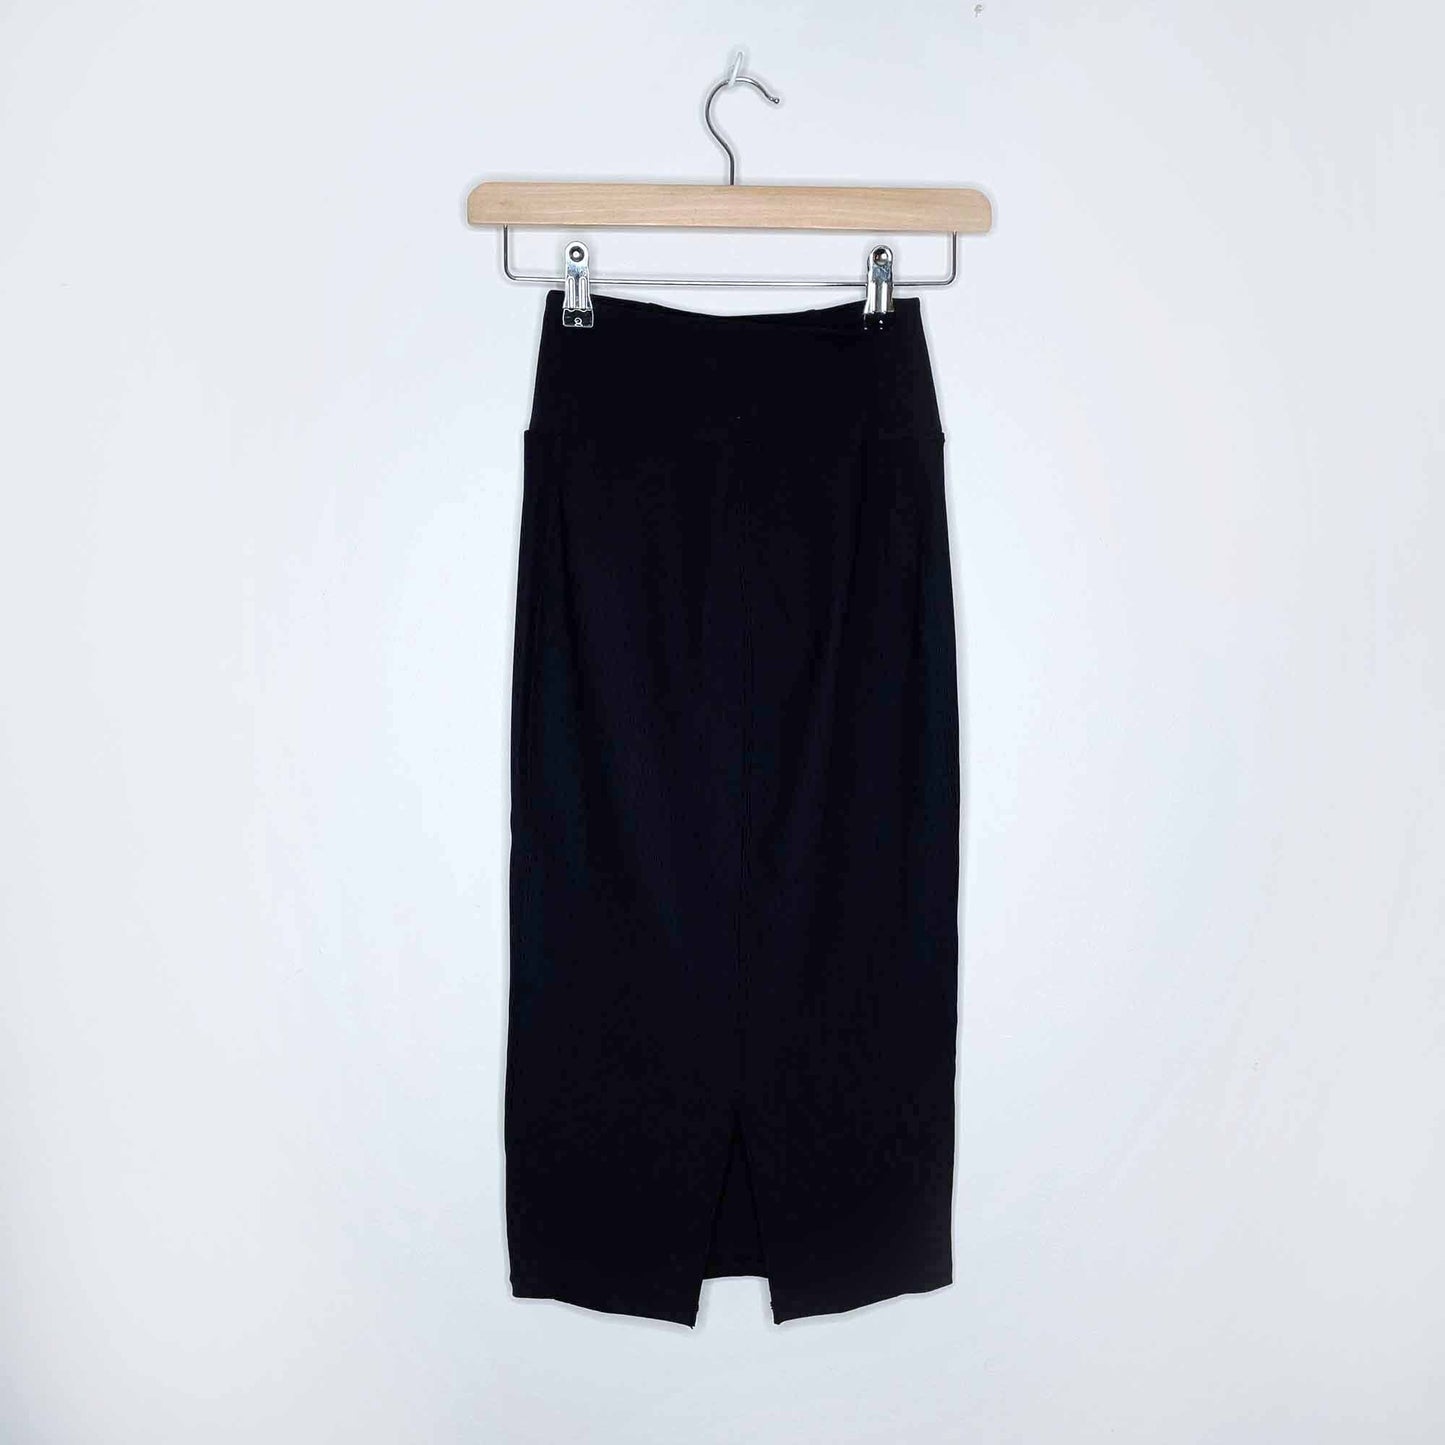 NWT lululemon a new route ribbed stretch skirt - size 0